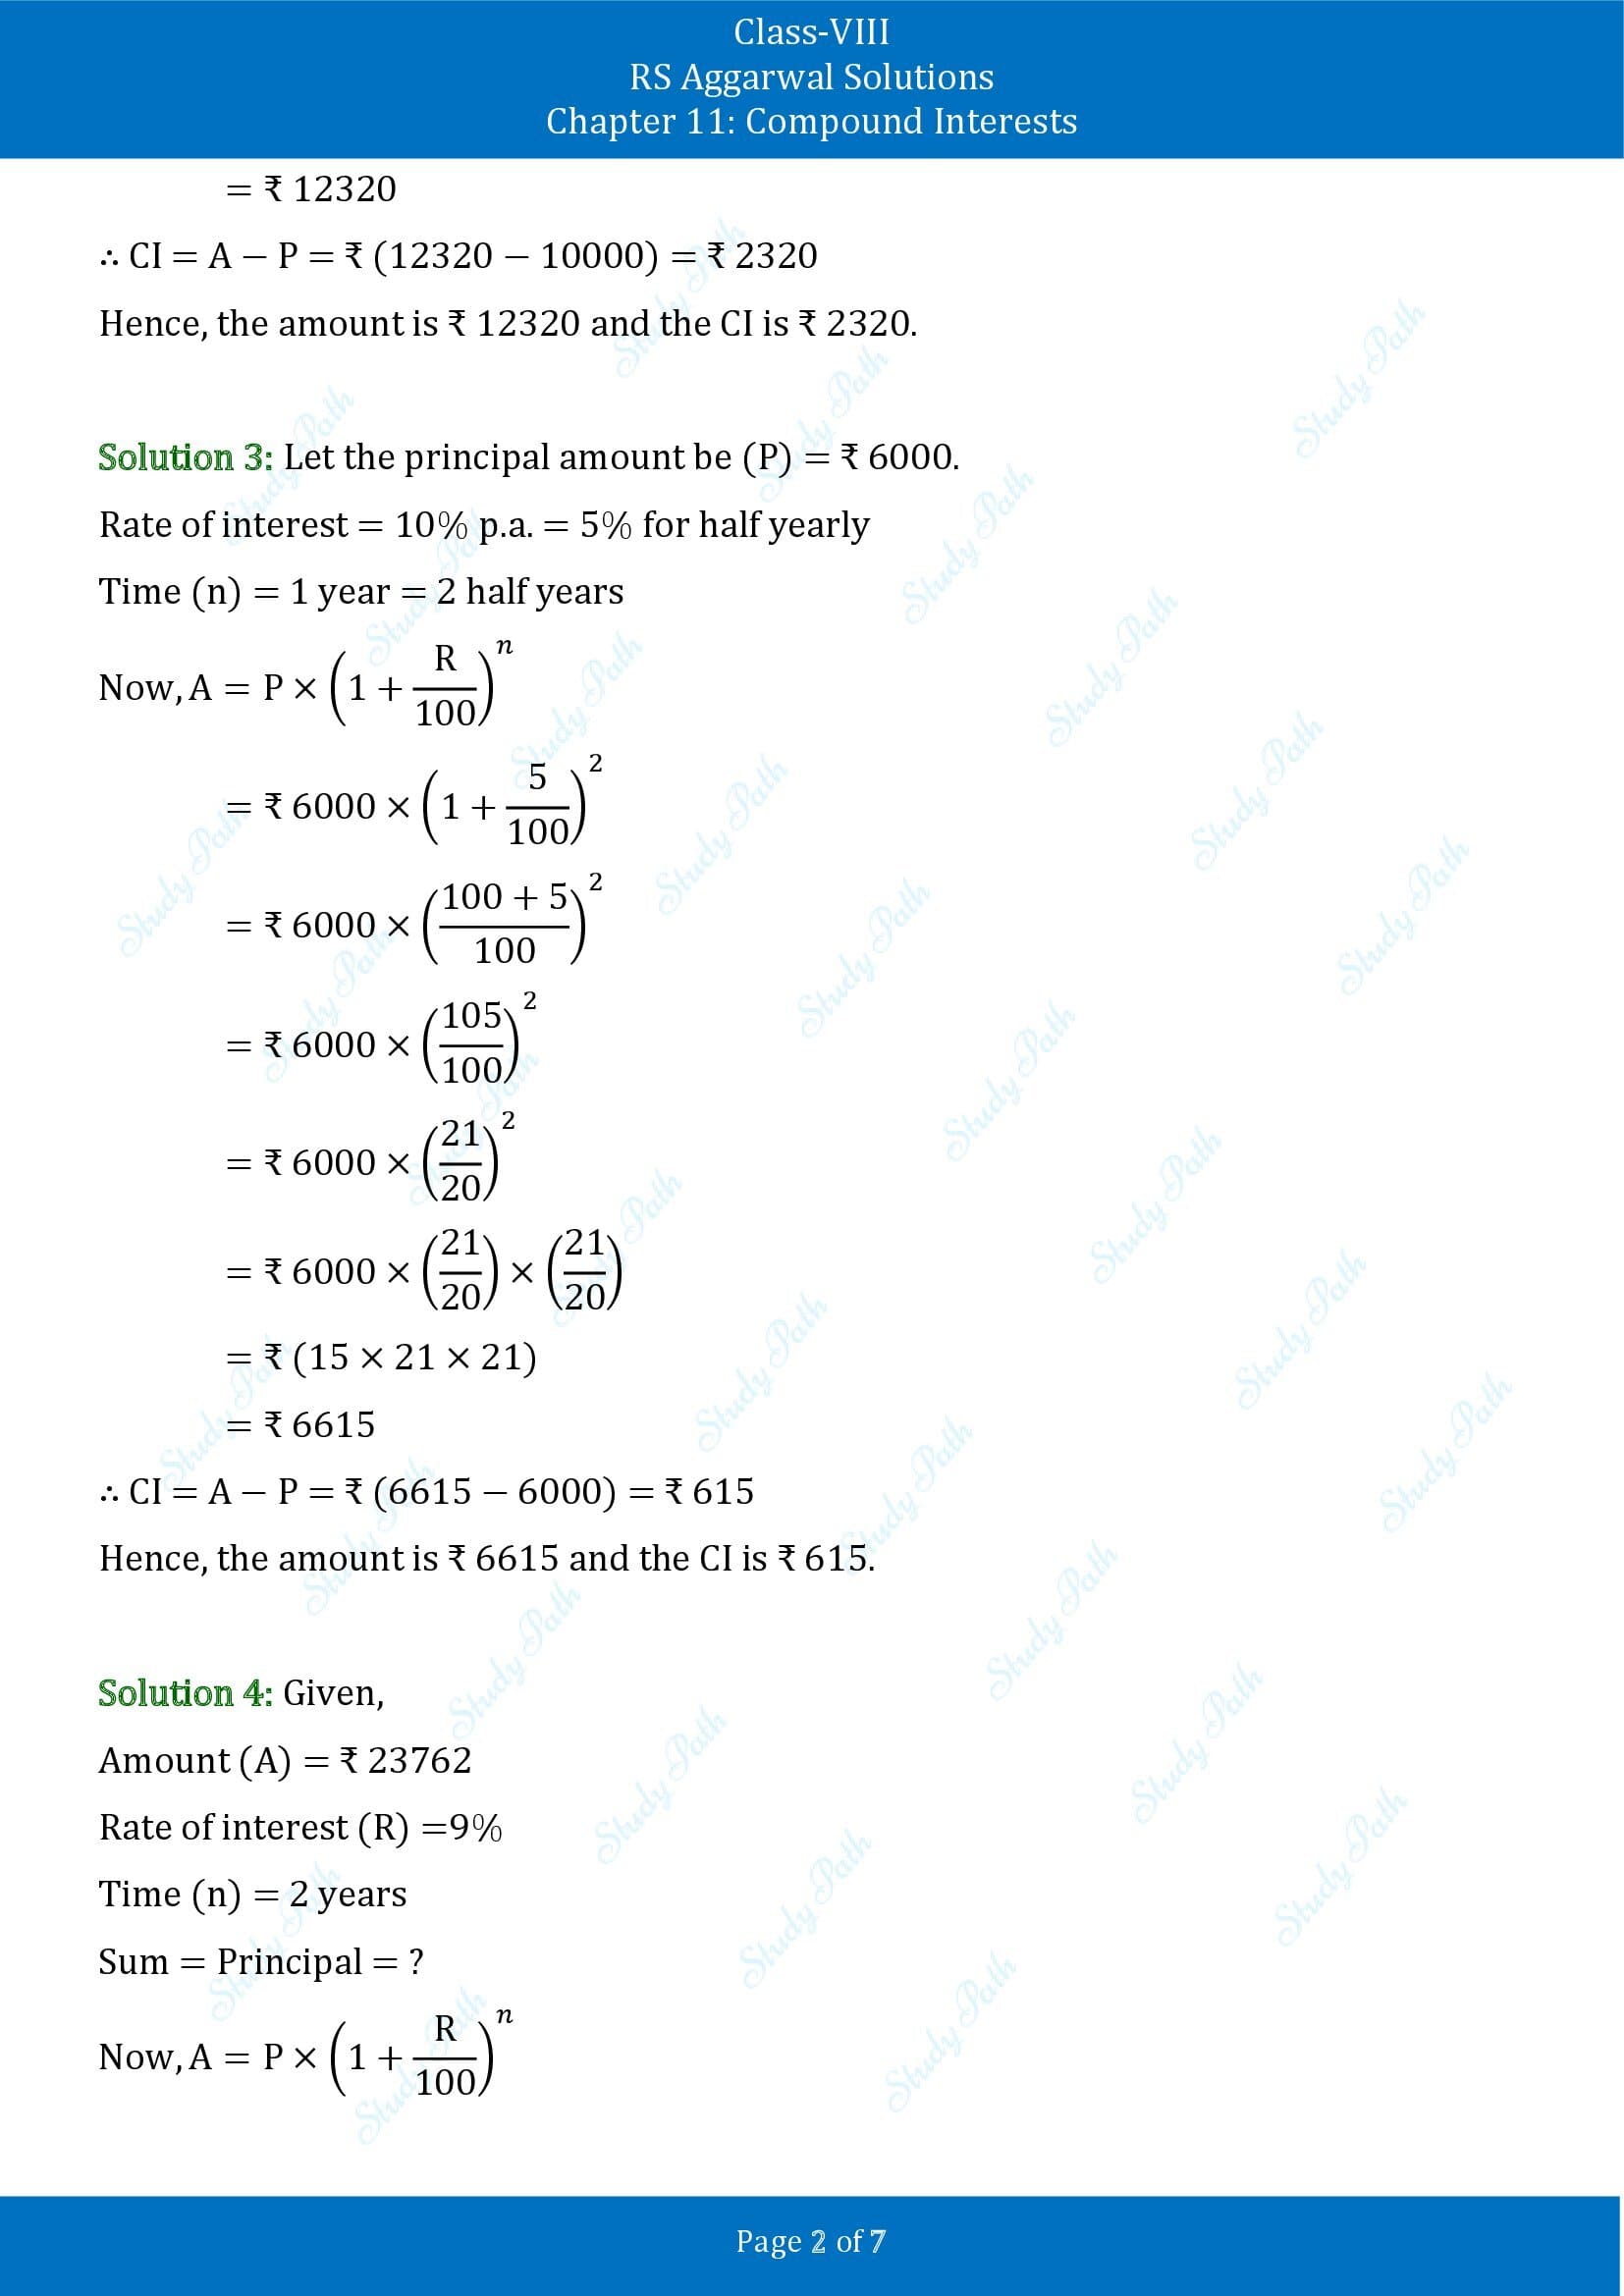 RS Aggarwal Solutions Class 8 Chapter 11 Compound Interests Test Paper 00002